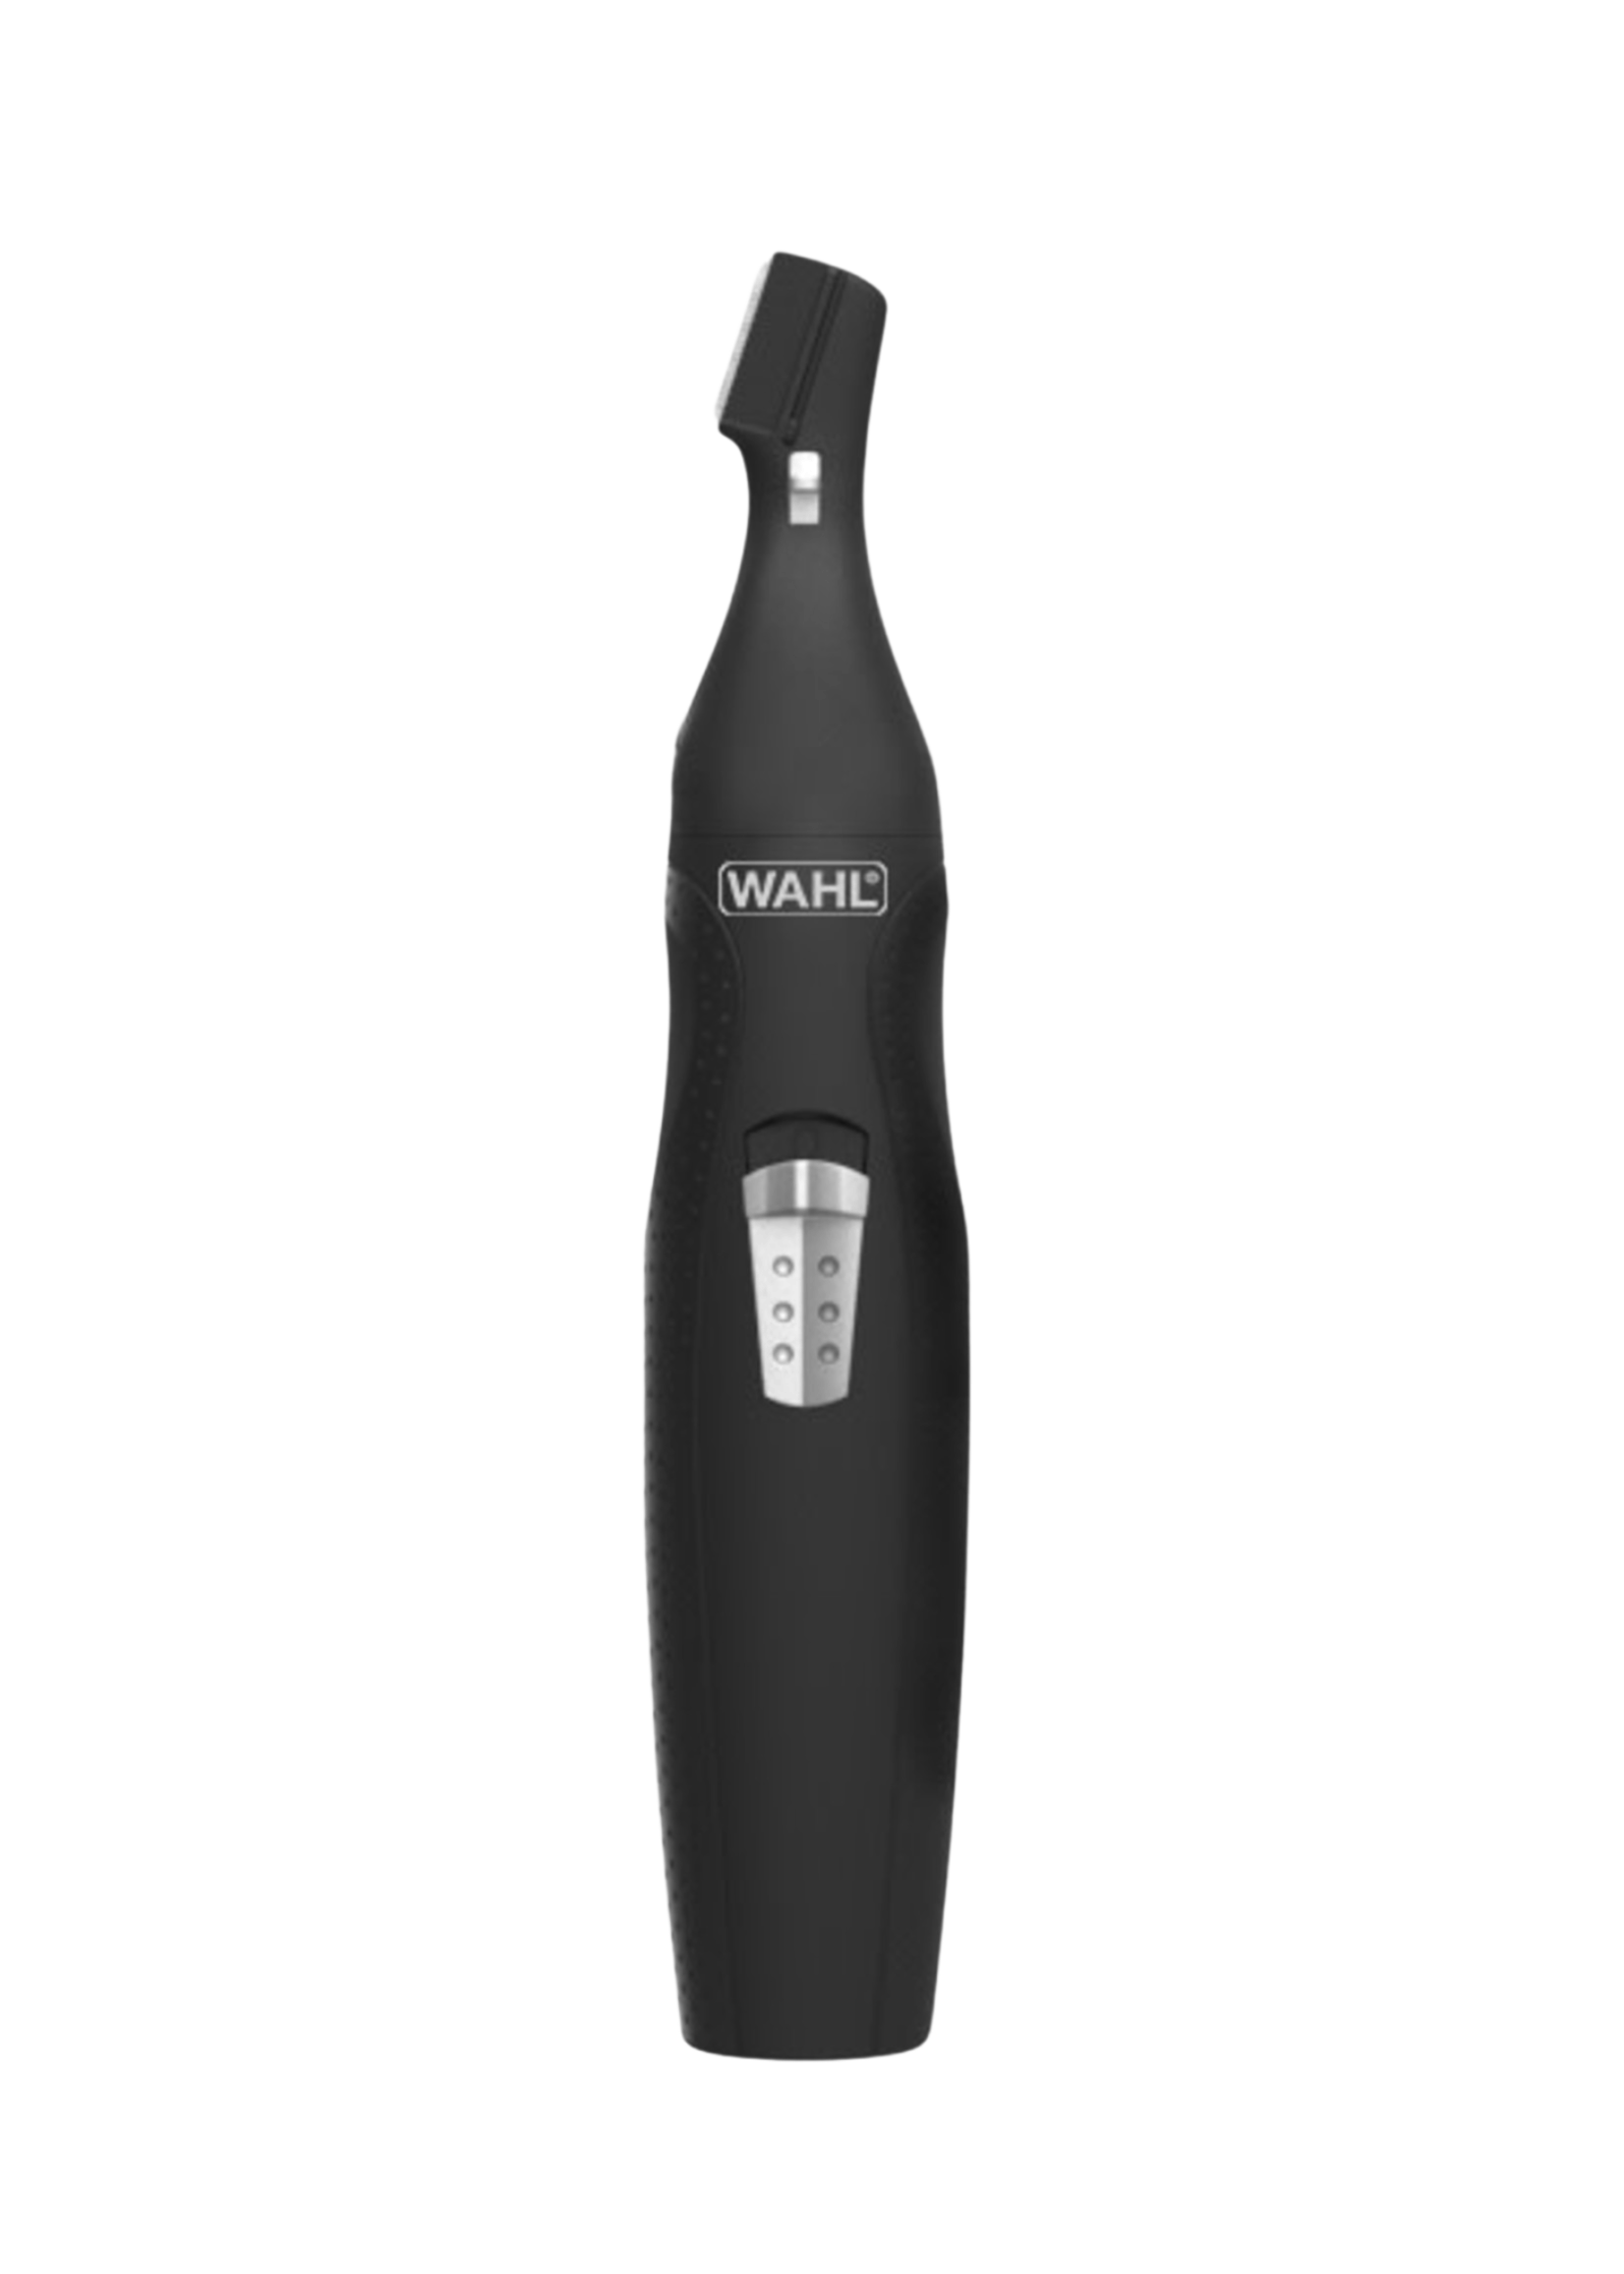 Wahl Home Wahl Mini Groomsman Ear Nose Brow Trimmer